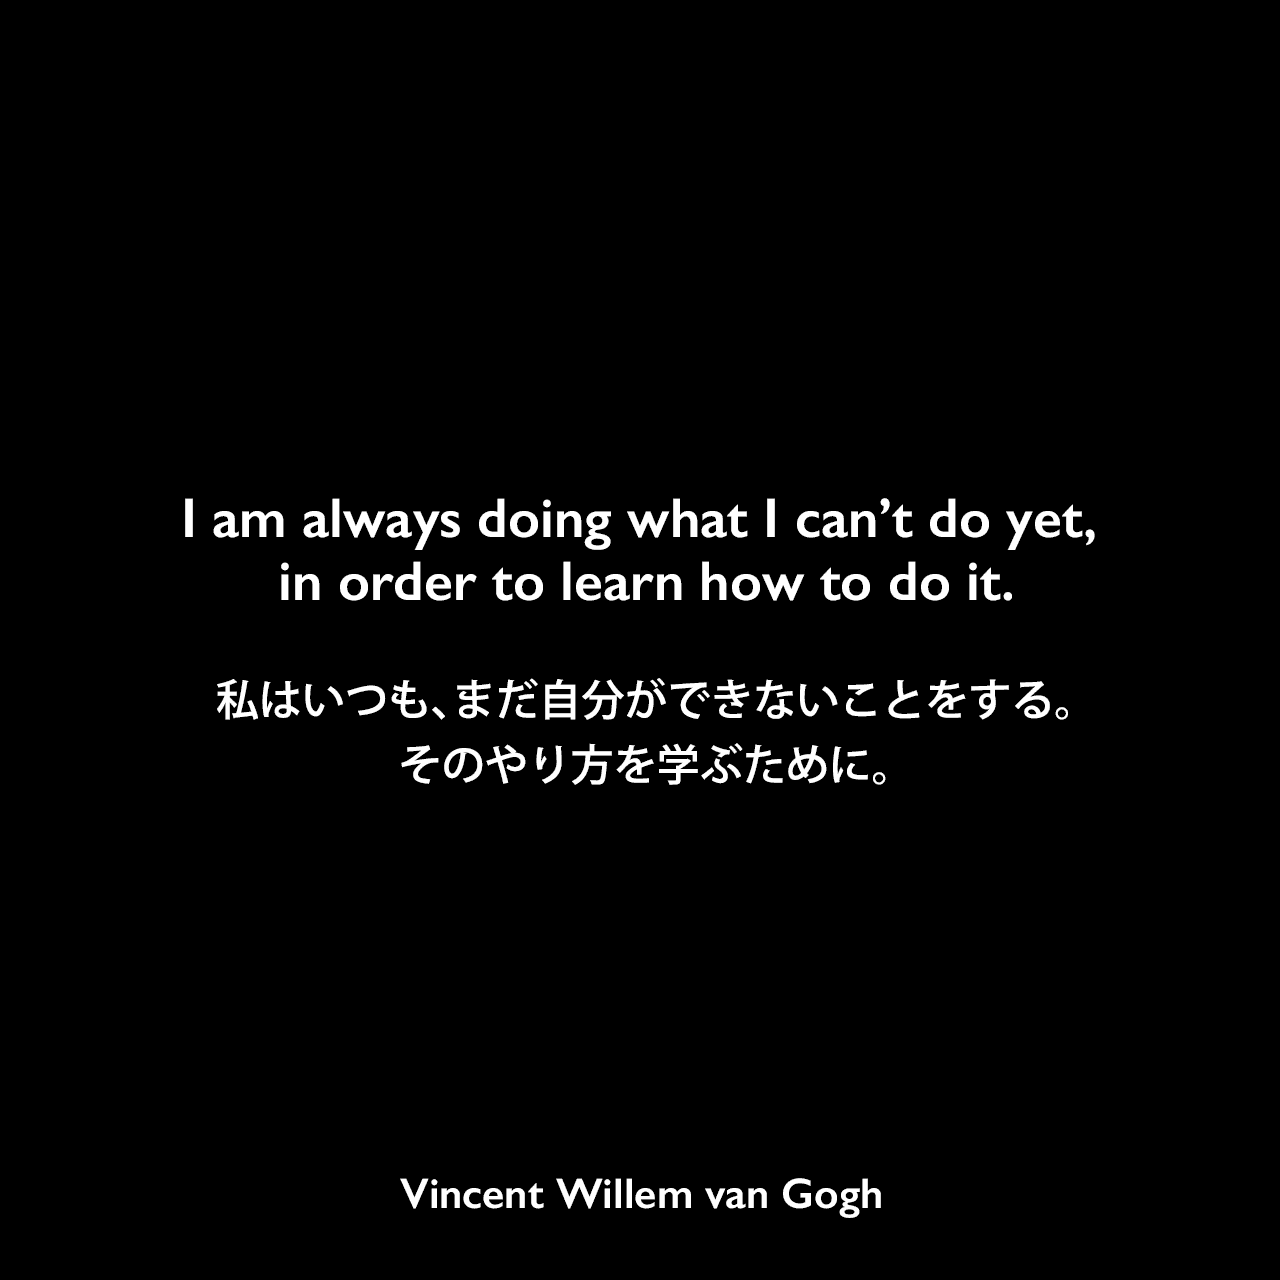 I am always doing what I can’t do yet, in order to learn how to do it.私はいつも、まだ自分ができないことをする。そのやり方を学ぶために。Vincent Willem van Gogh